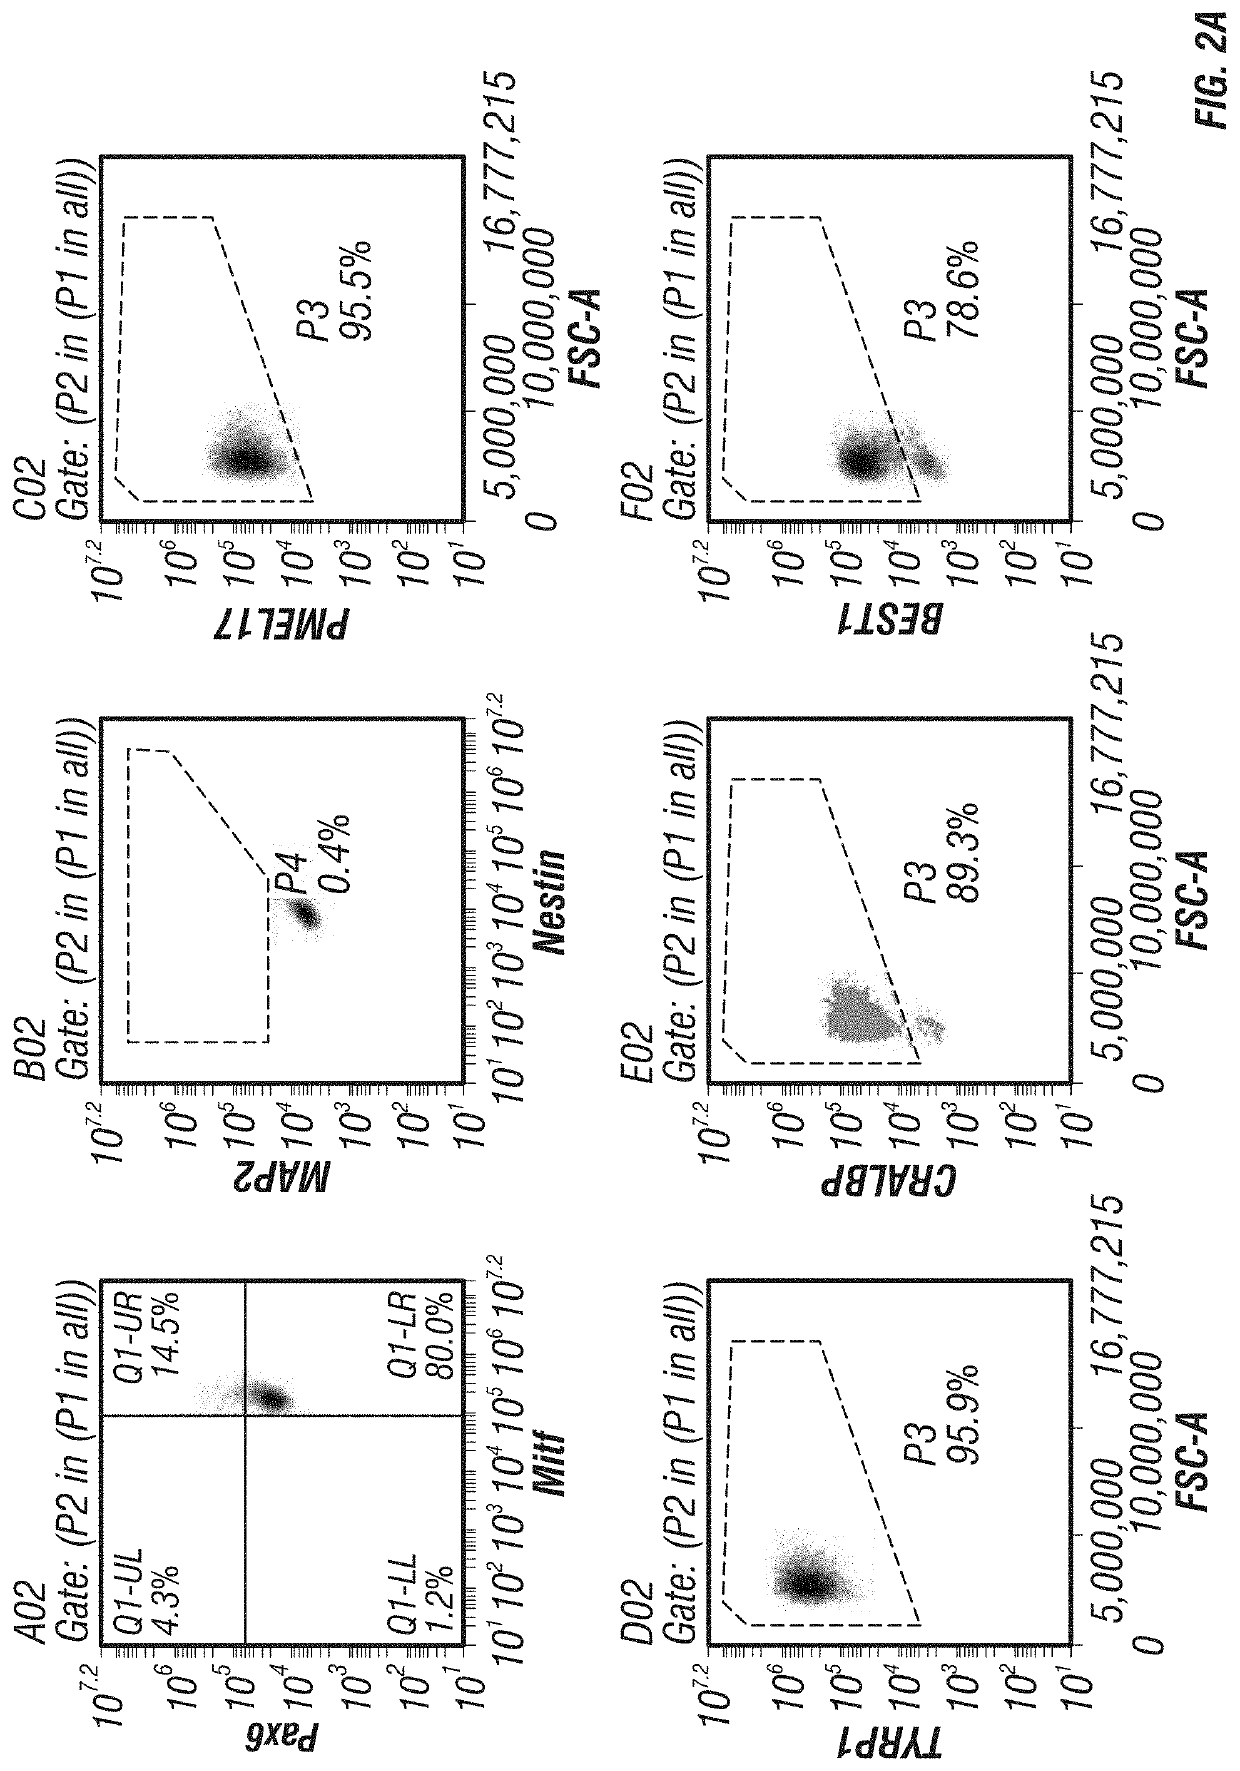 Macs-based purification of stem cell-derived retinal pigment epithelium